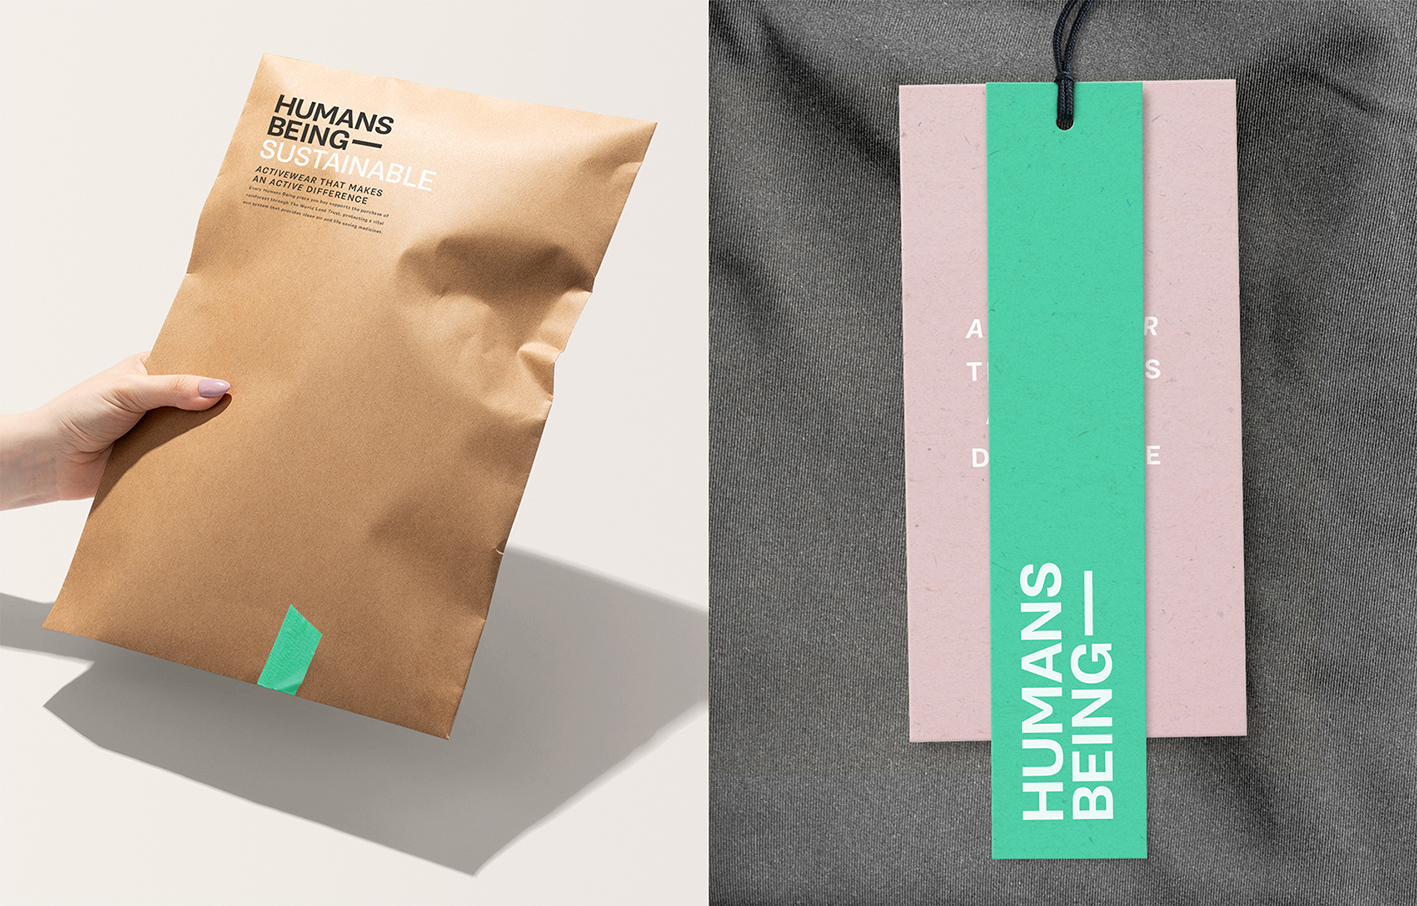 B&b Studio Creates the Branding for Humans Being – a Sustainable and ...